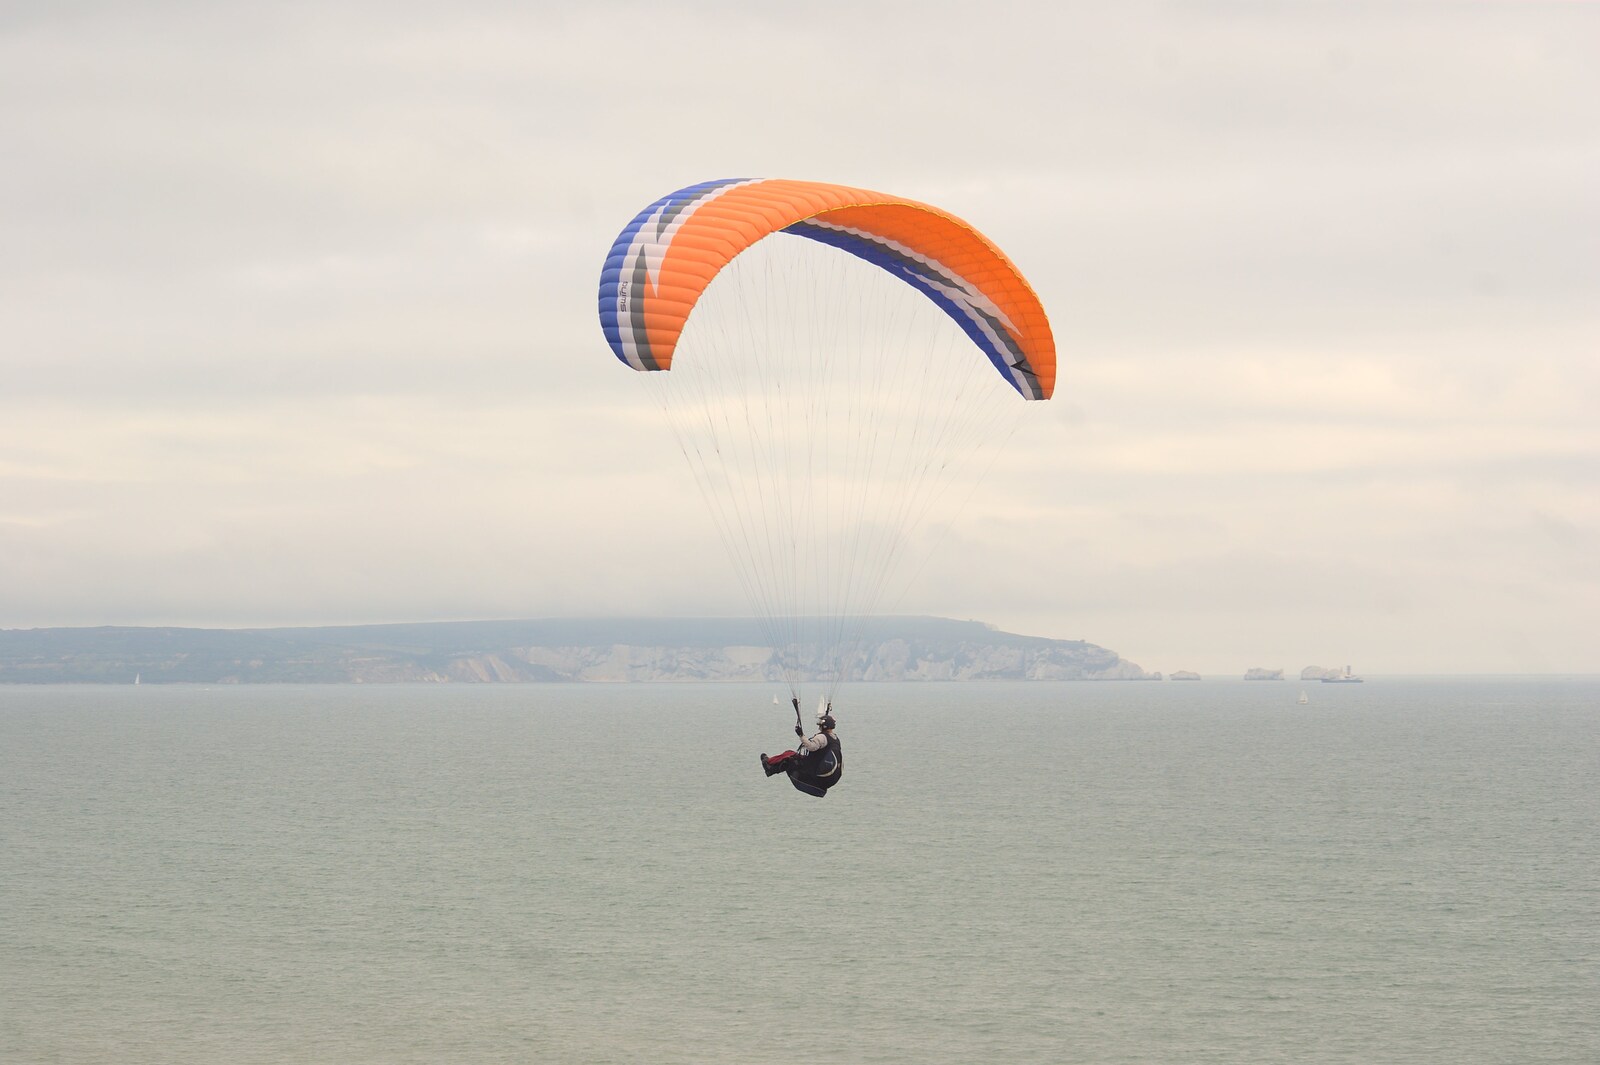 Parasailer in front of the Isle of Wight from A Camper Van Odyssey: Oxford, Salisbury, New Forest and Barton-on-Sea - 19th June 2011